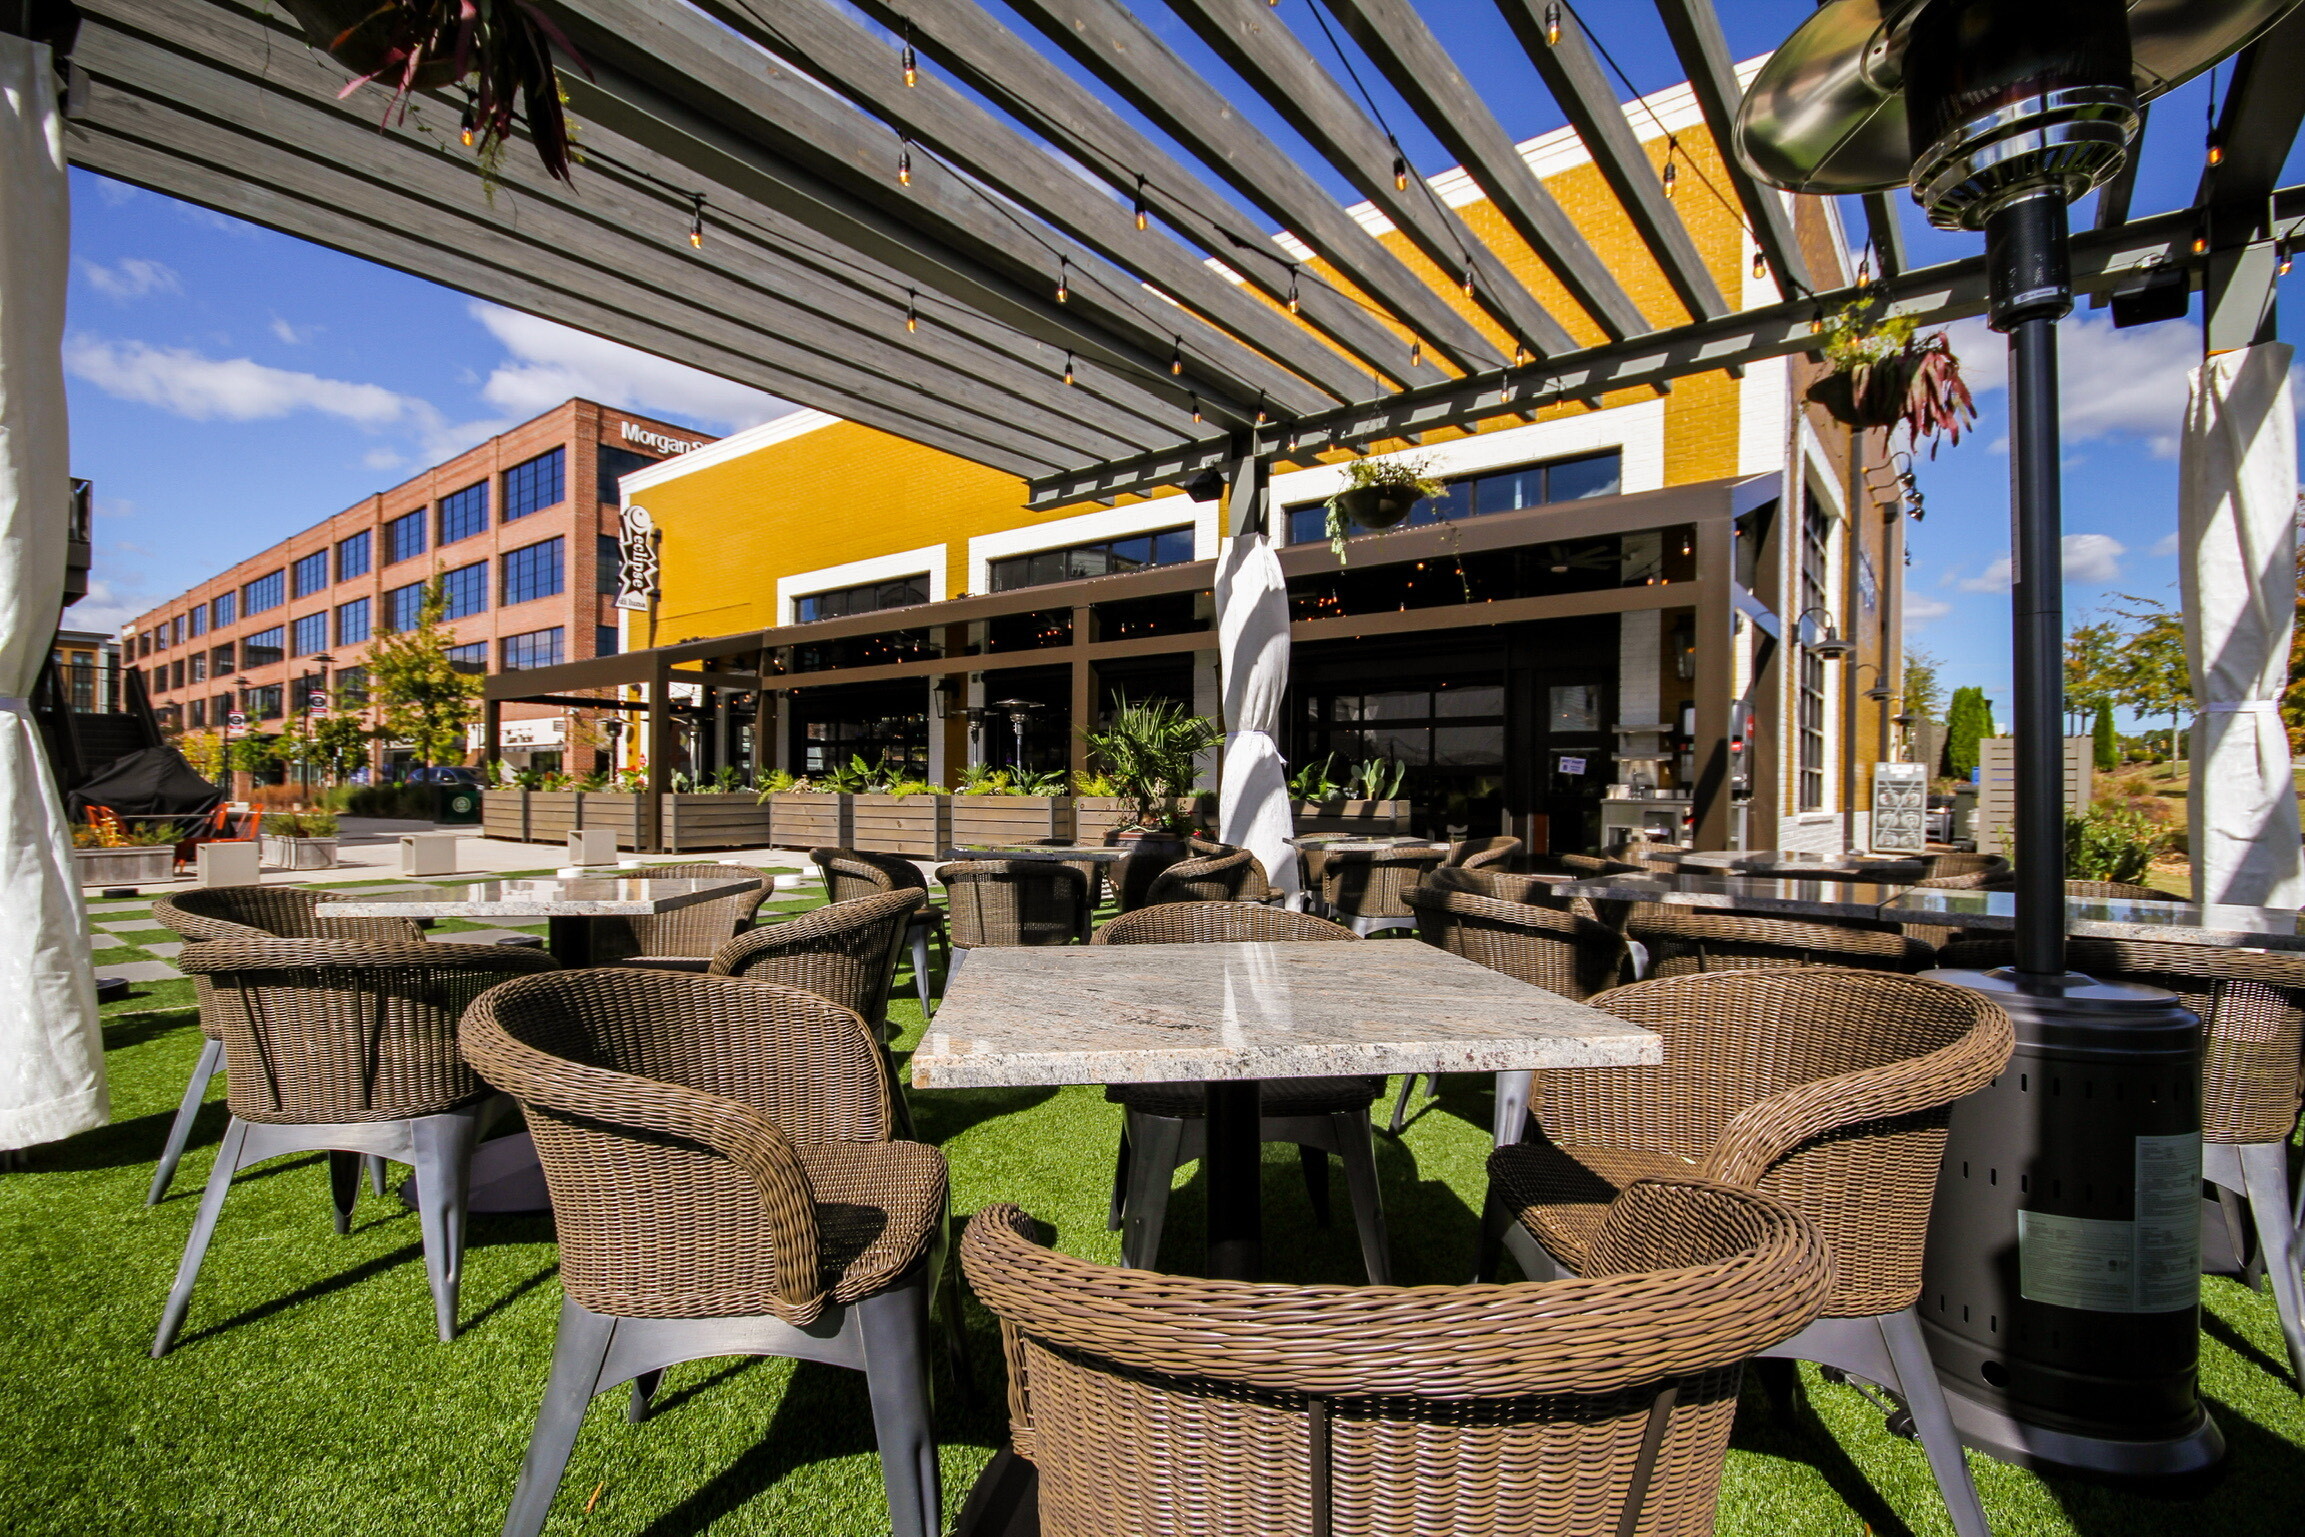 The outdoor dining area at Eclipse di Luna